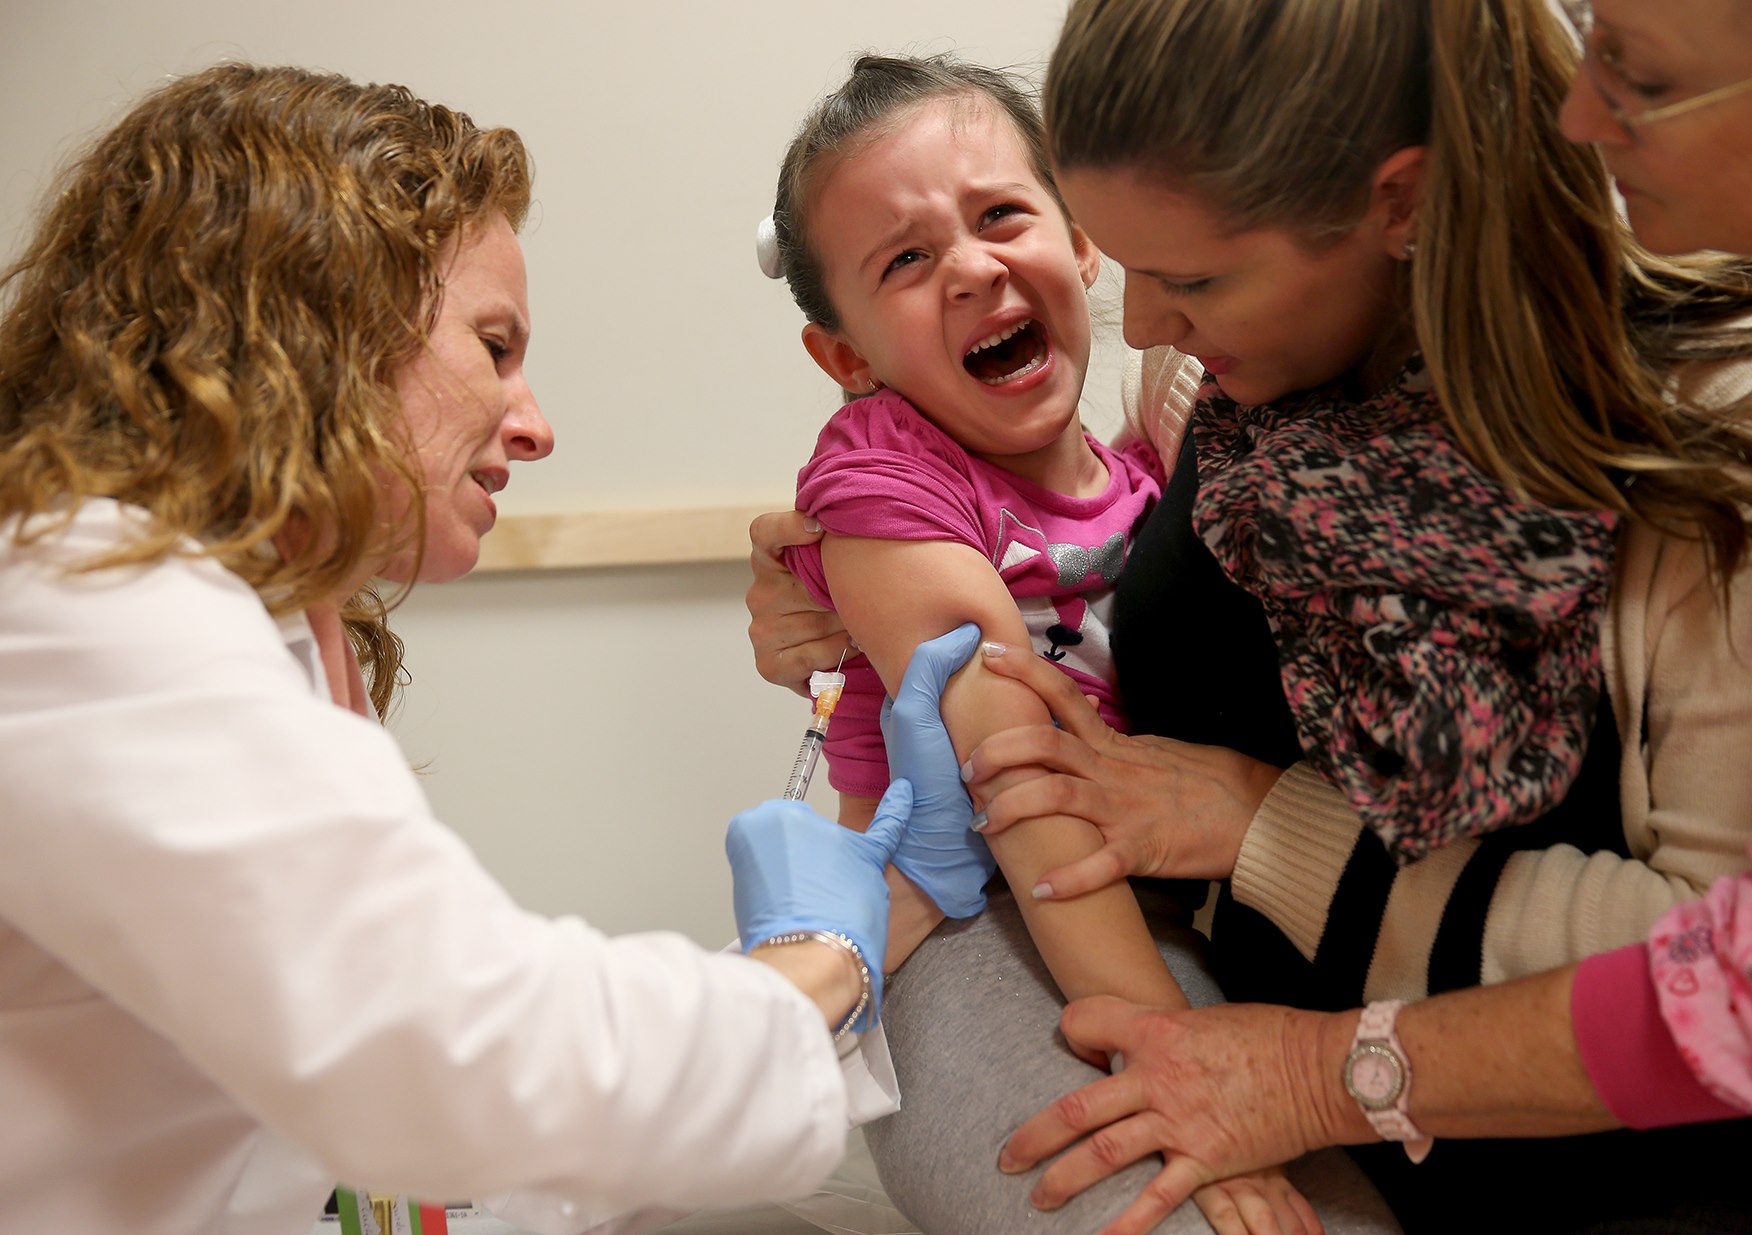 Image: STUDY: Vaccinated children “significantly less healthy” than unvaccinated children